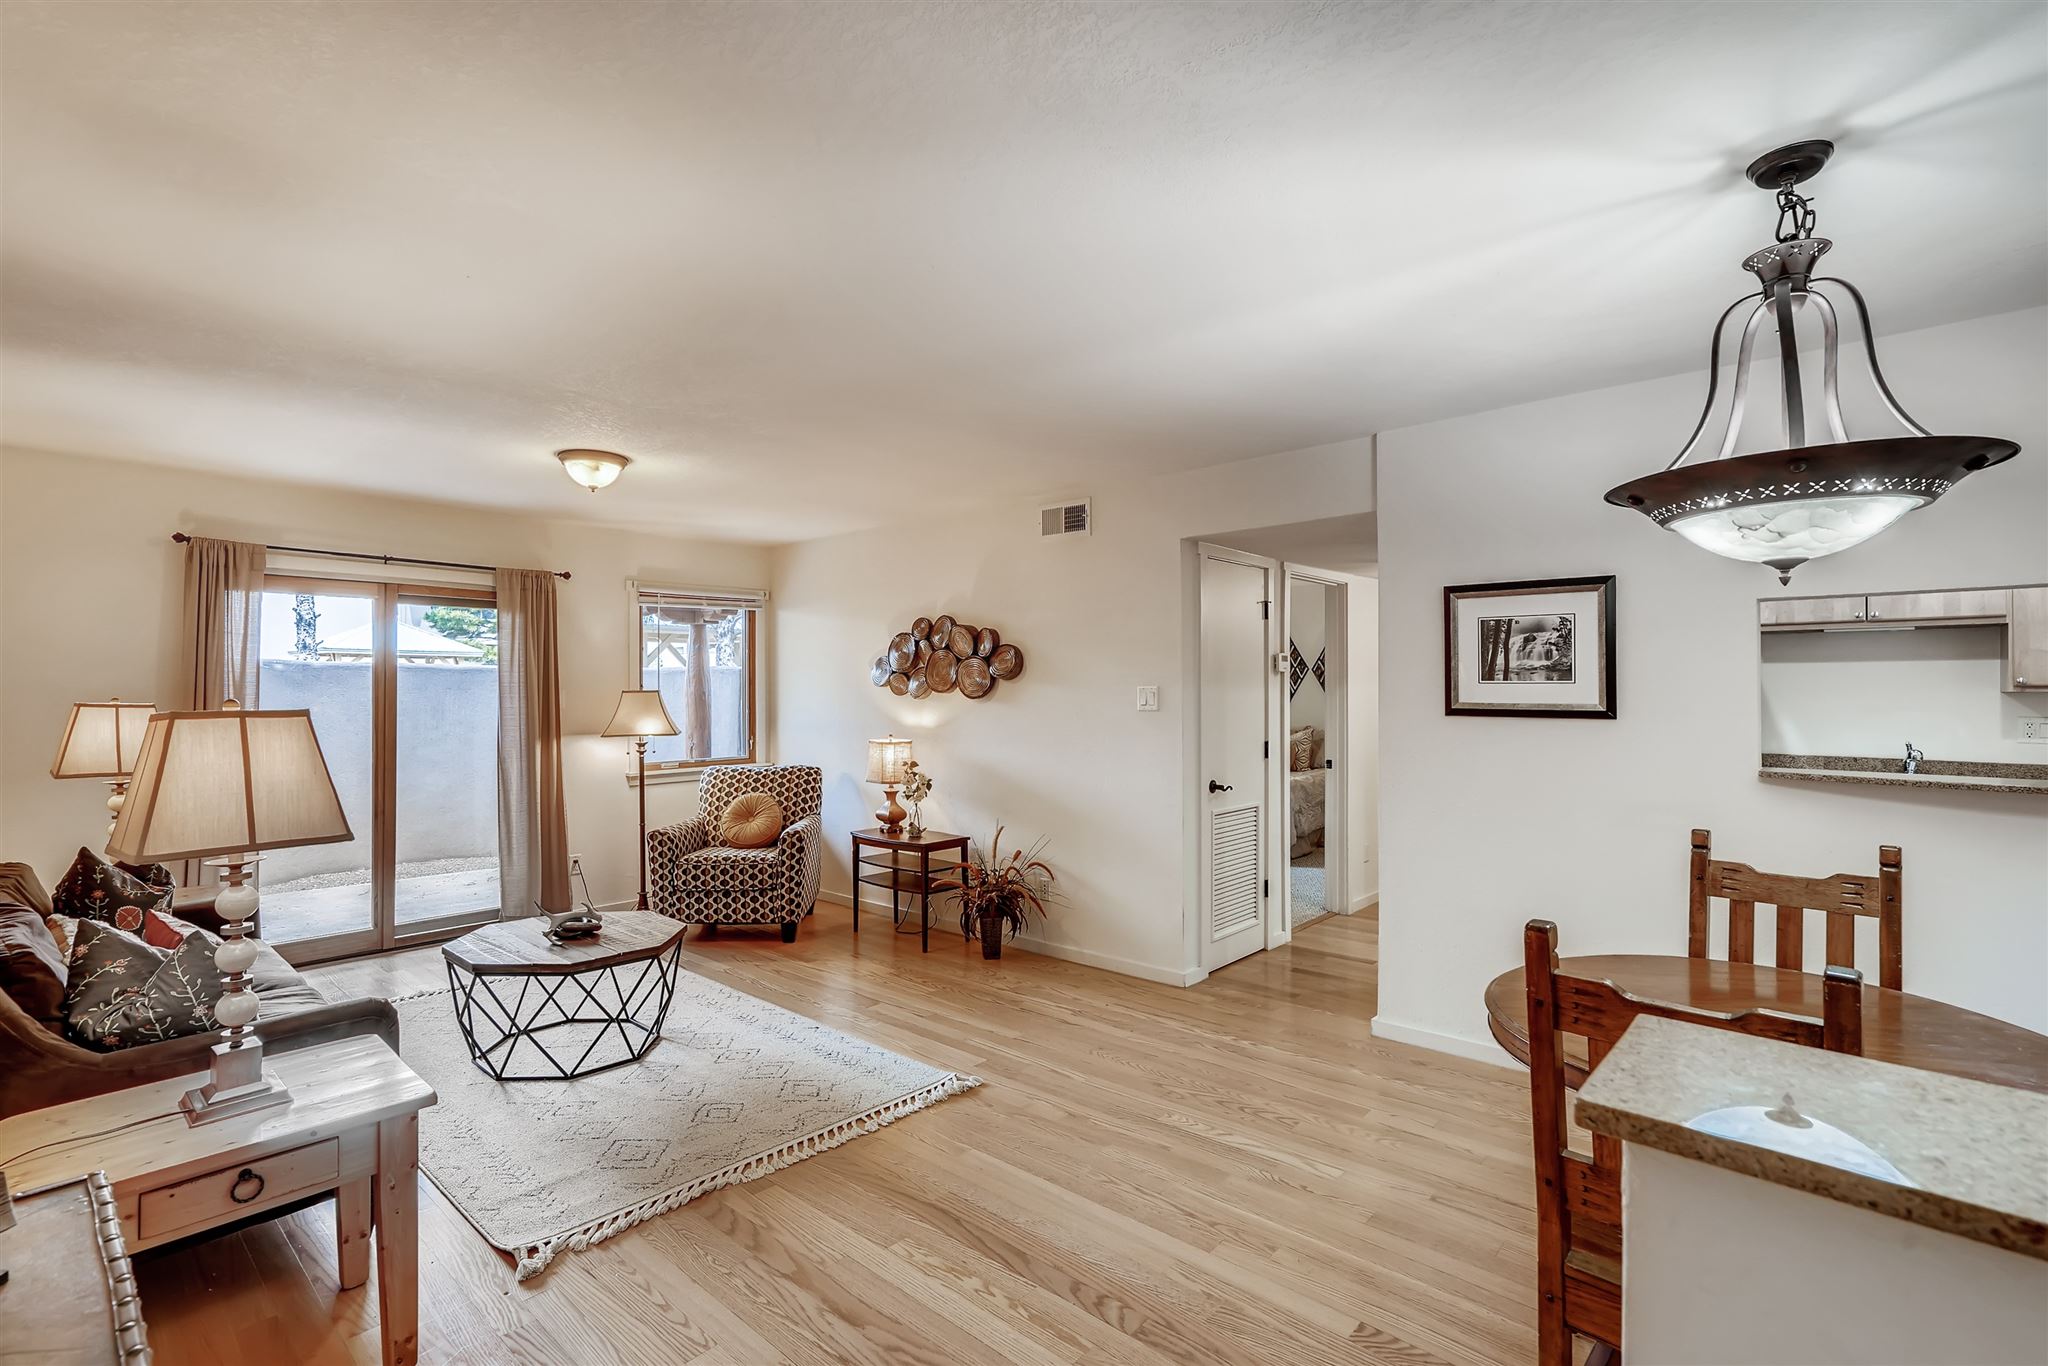 601 San Mateo Unit 145 Building 13, Santa Fe, New Mexico 87505, 1 Bedroom Bedrooms, ,1 BathroomBathrooms,Residential,For Sale,601 San Mateo Unit 145 Building 13,202101049